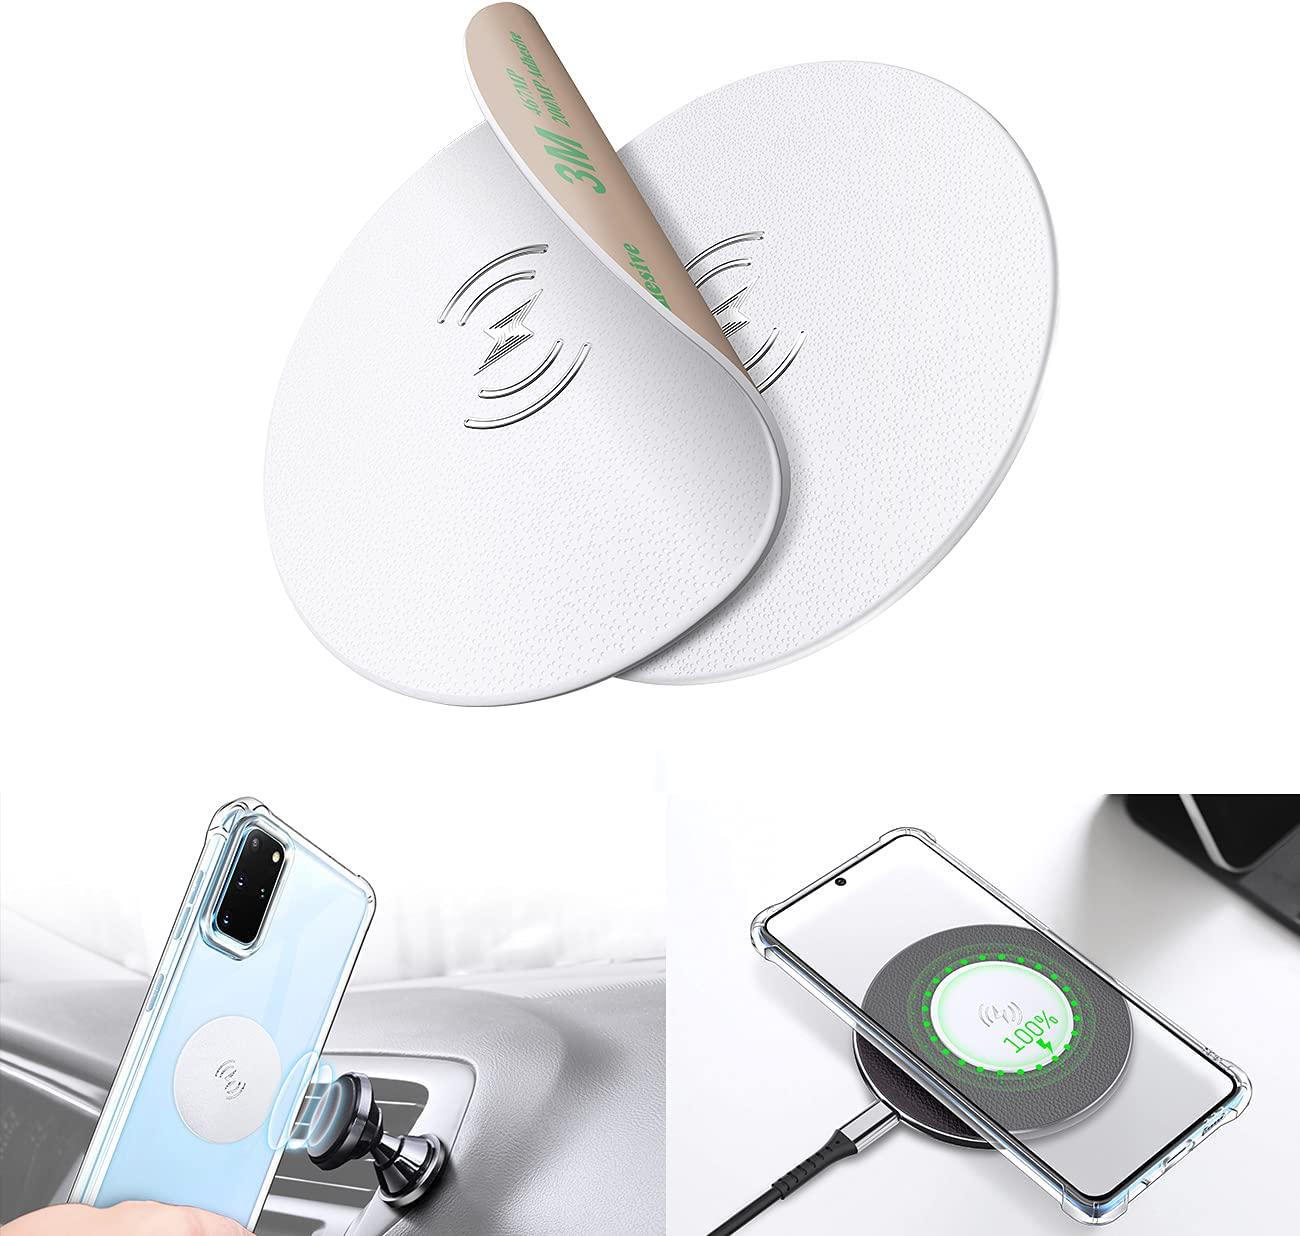 eSamcore, eSamcore Soft Flexible Magnetic Plate for Magnetic Phone Mount, Luxurious Phone Magnet Sticker Allows Wireless Charging for Magnetic Phone Holder for Car, Metal Plate for Cell Phone [2-Pack] White